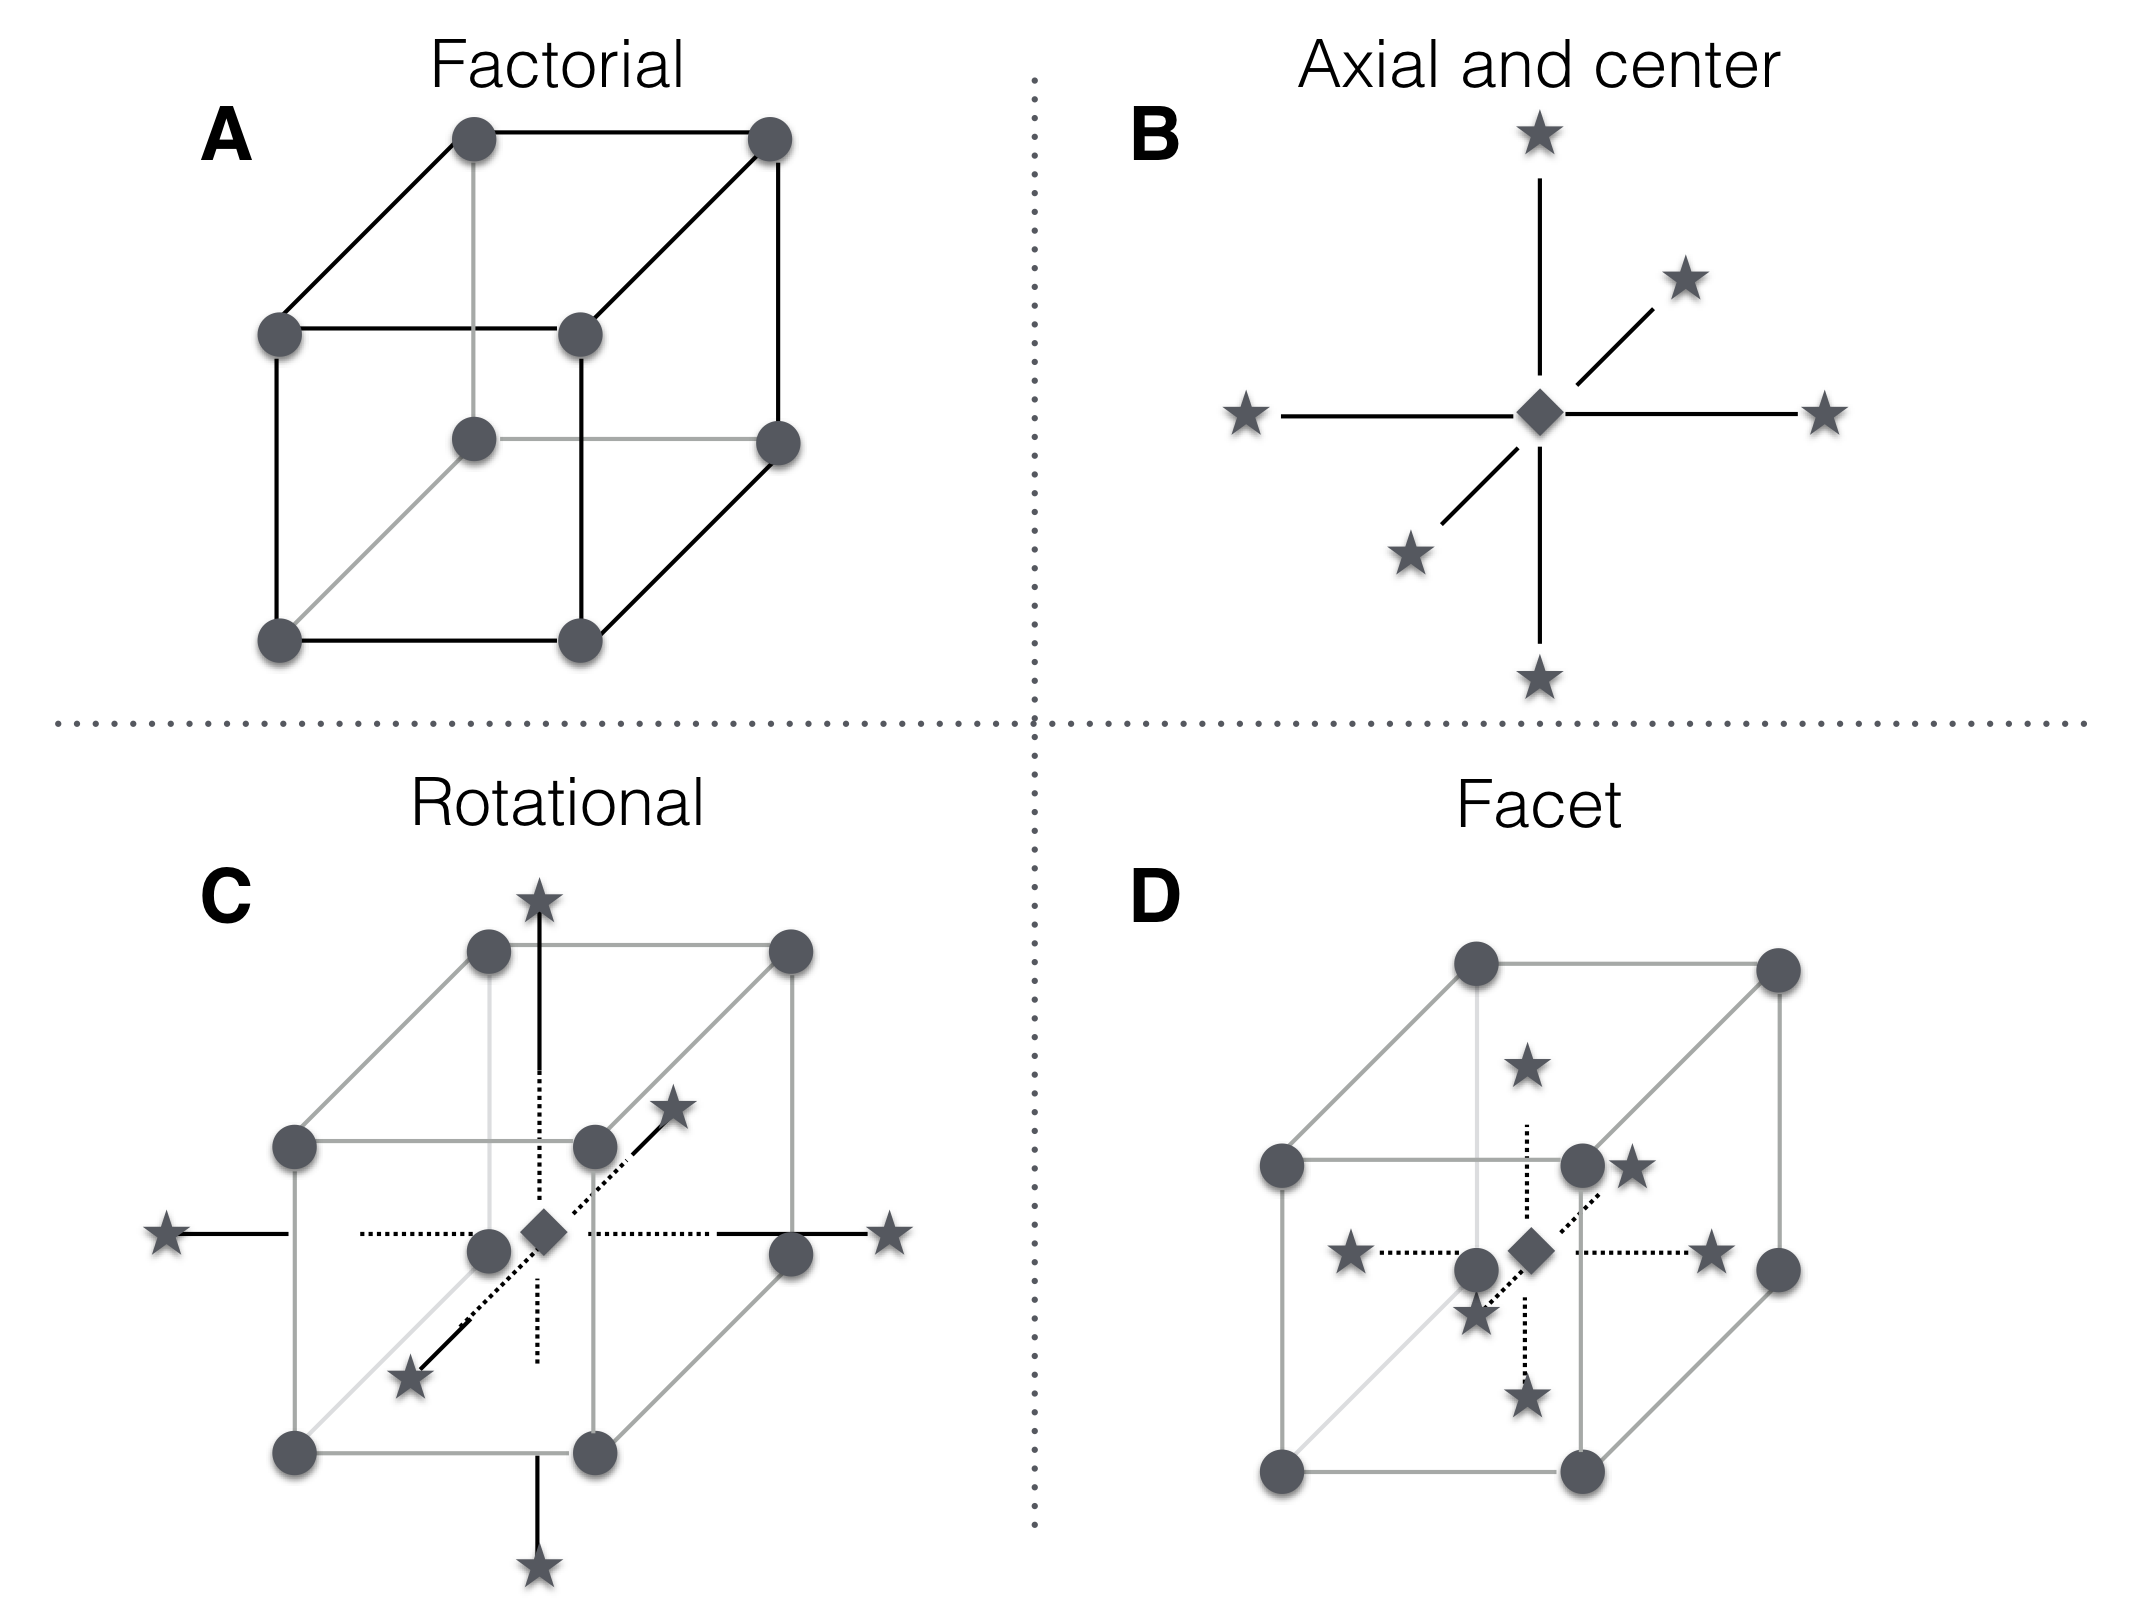 A central composite design for three factors. A: Design points for $2^3$ full factorial. B: Center point location and axial points chosen along axis parallel to coordinate axis and through center point. C: Central composite design with axis points chosen for rotatability. D: Combined design points with axial points chosen on facets introduce no new factor levels.